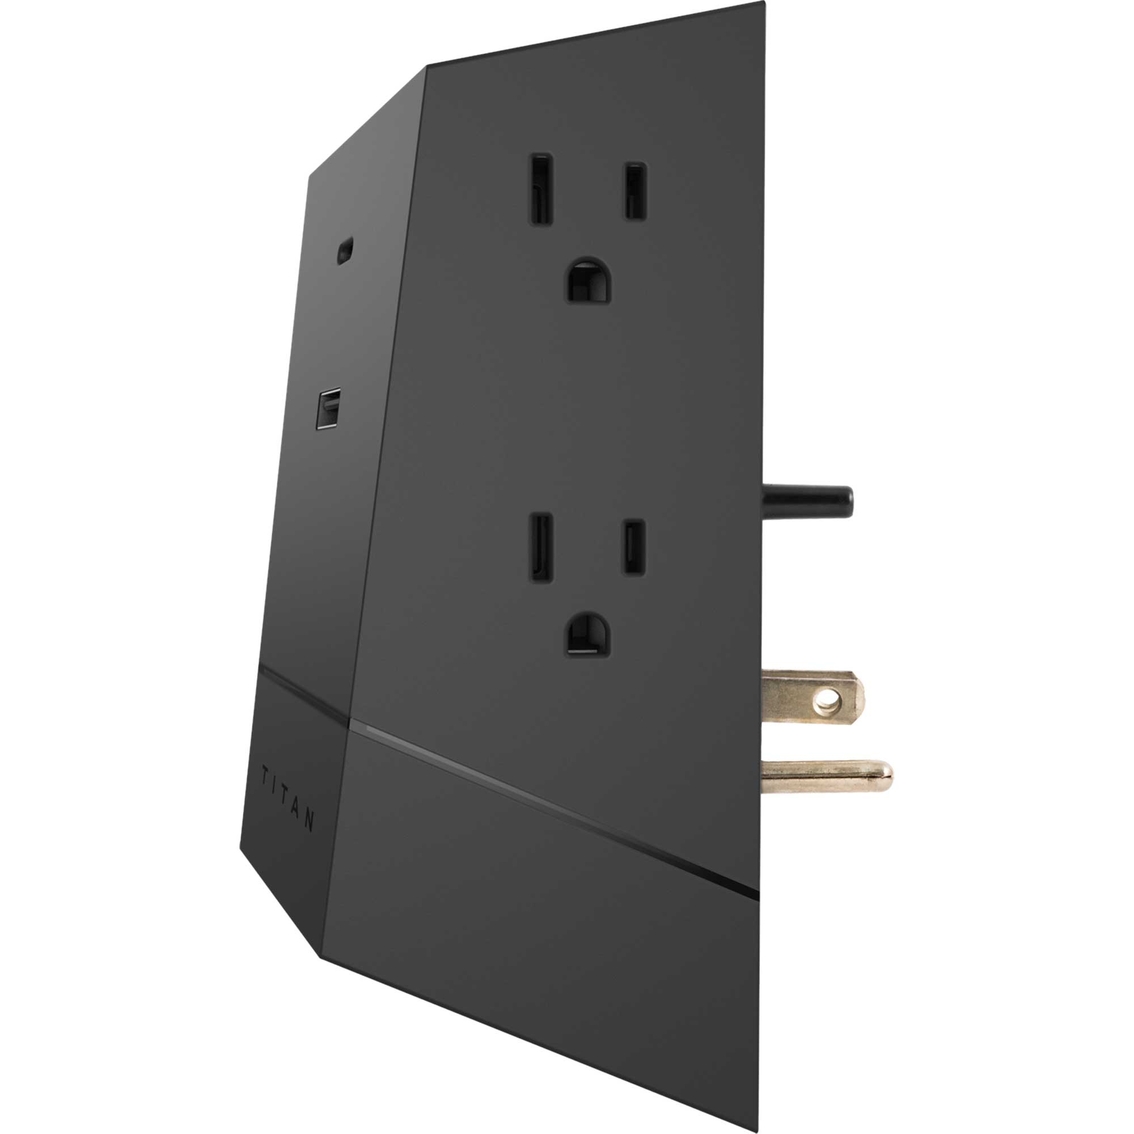 Jasco Titan Color Changing 4 Outlet Surge Tap with 1 UBS-C and 1 USB - Image 3 of 5